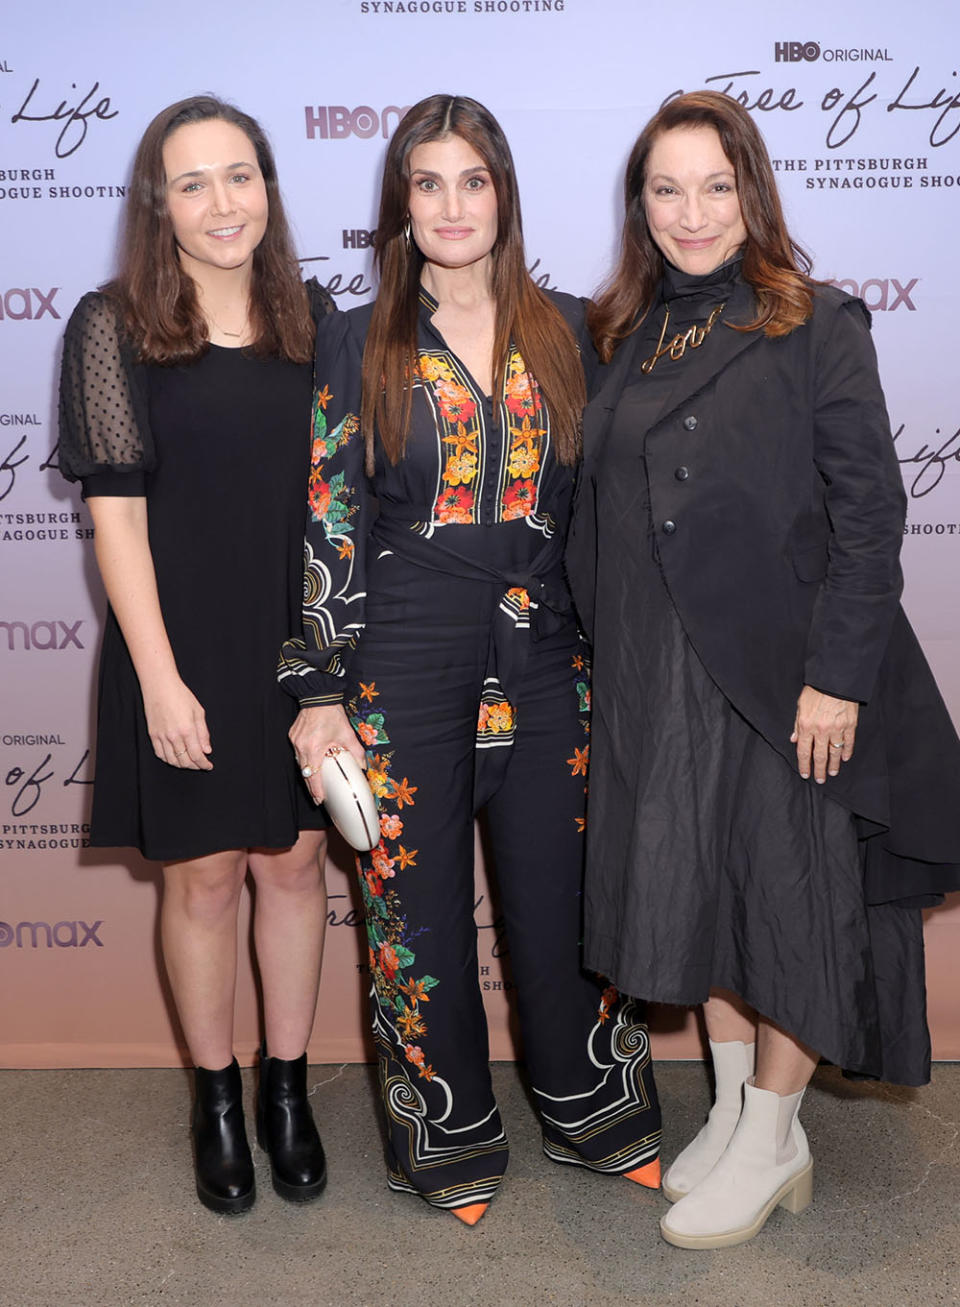 Kait Diaz, Idina Menzel and Director Trish Adlesic attend a special screening for the HBO Documentary Film "A Tree Of Life: The Pittsburgh Synagogue Shooting" at Hudson Yards on October 20, 2022 in New York City.